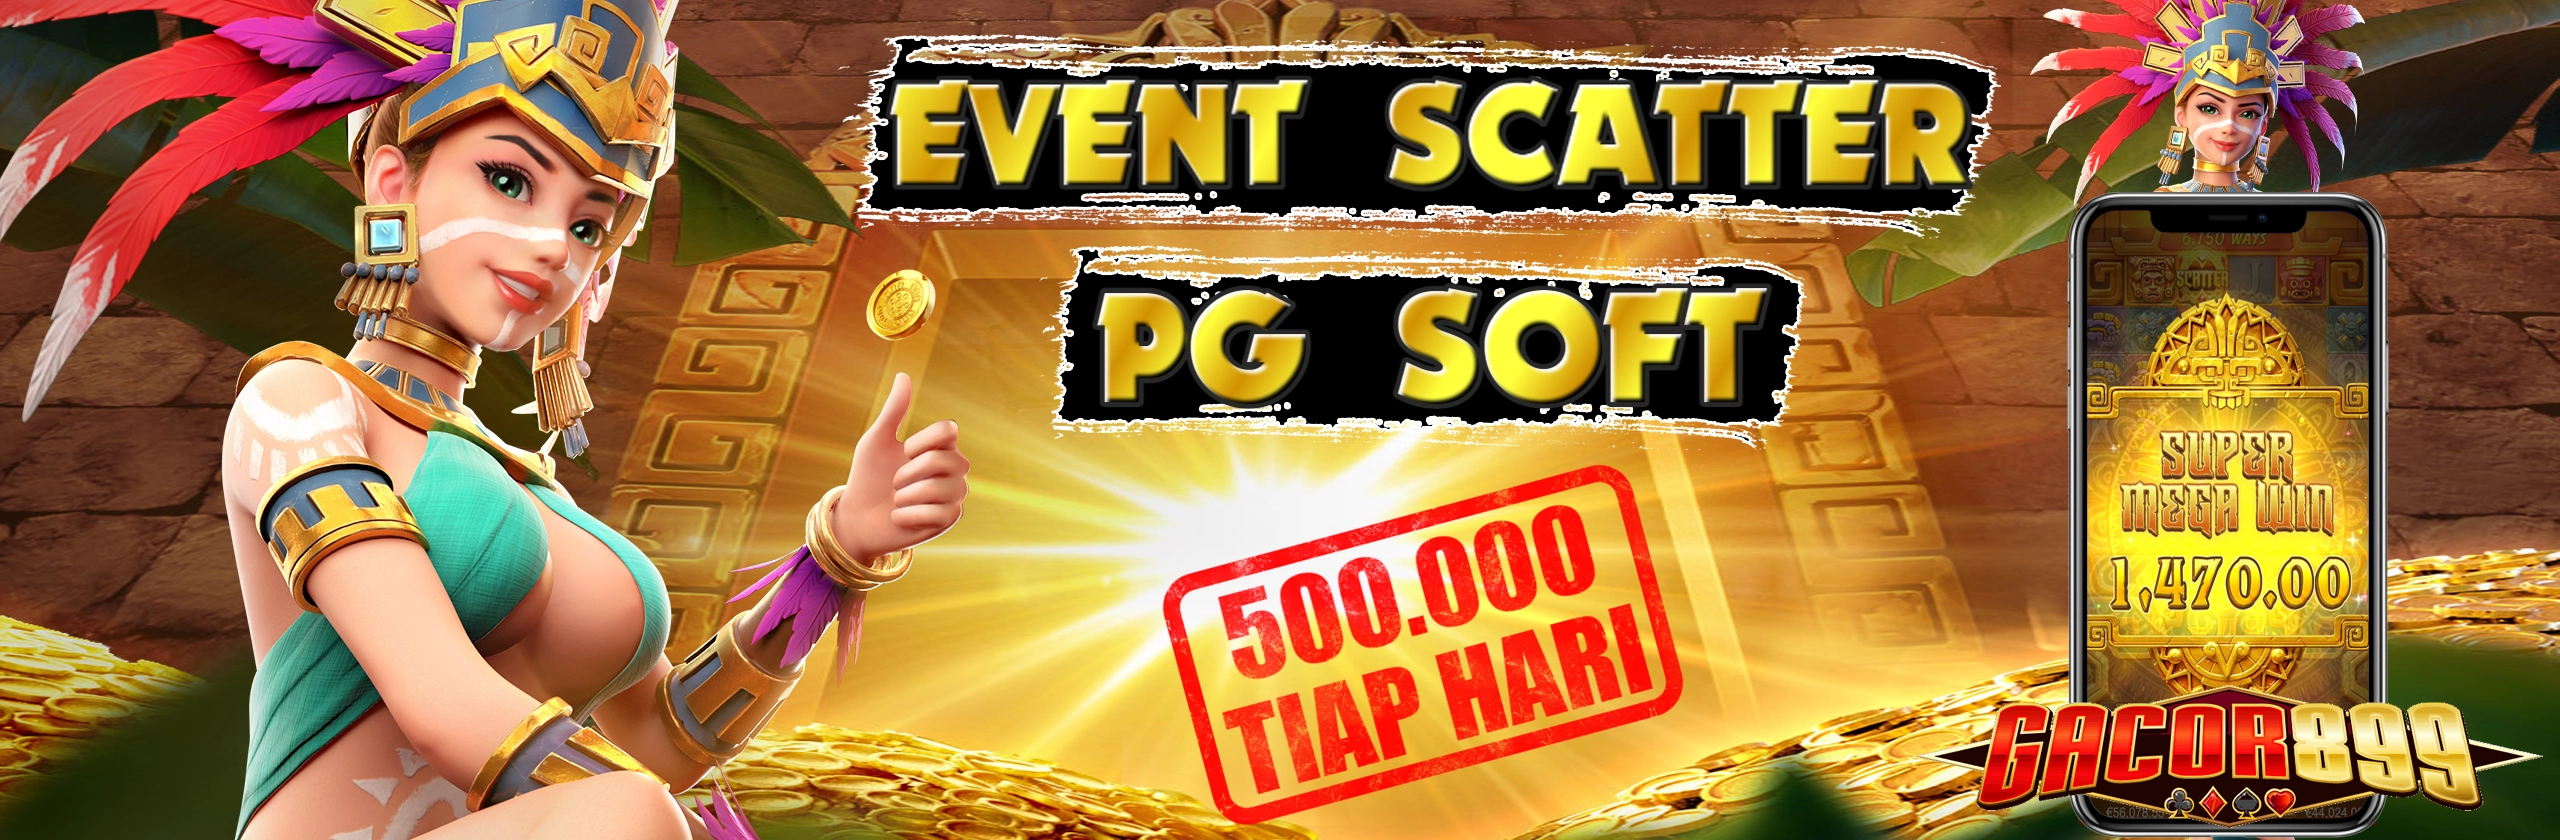 Event Scatter PGSOFT